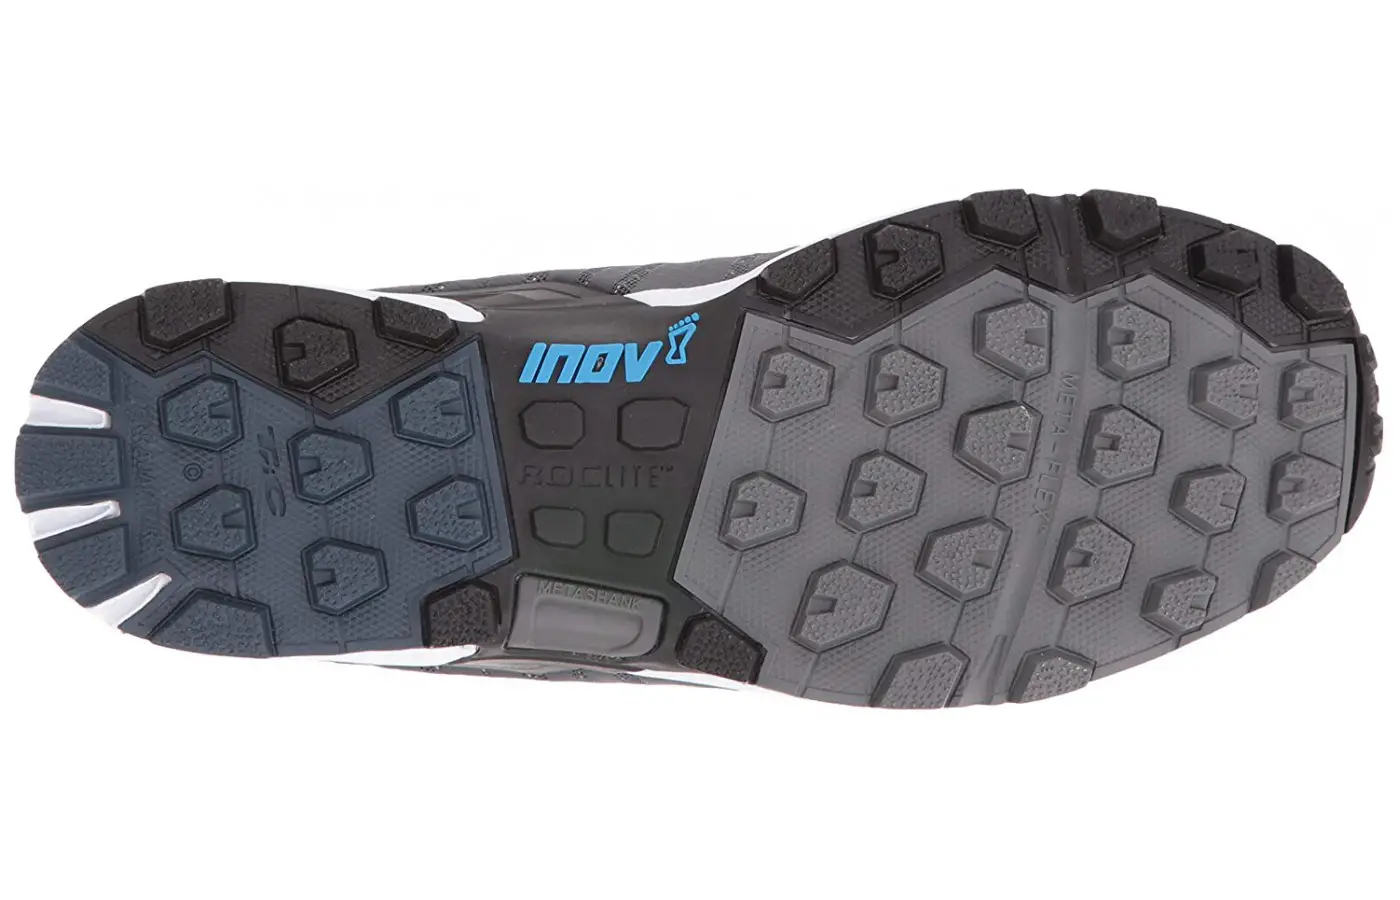 Multi-directional claw-shaped cleats are featured on the outsole design.